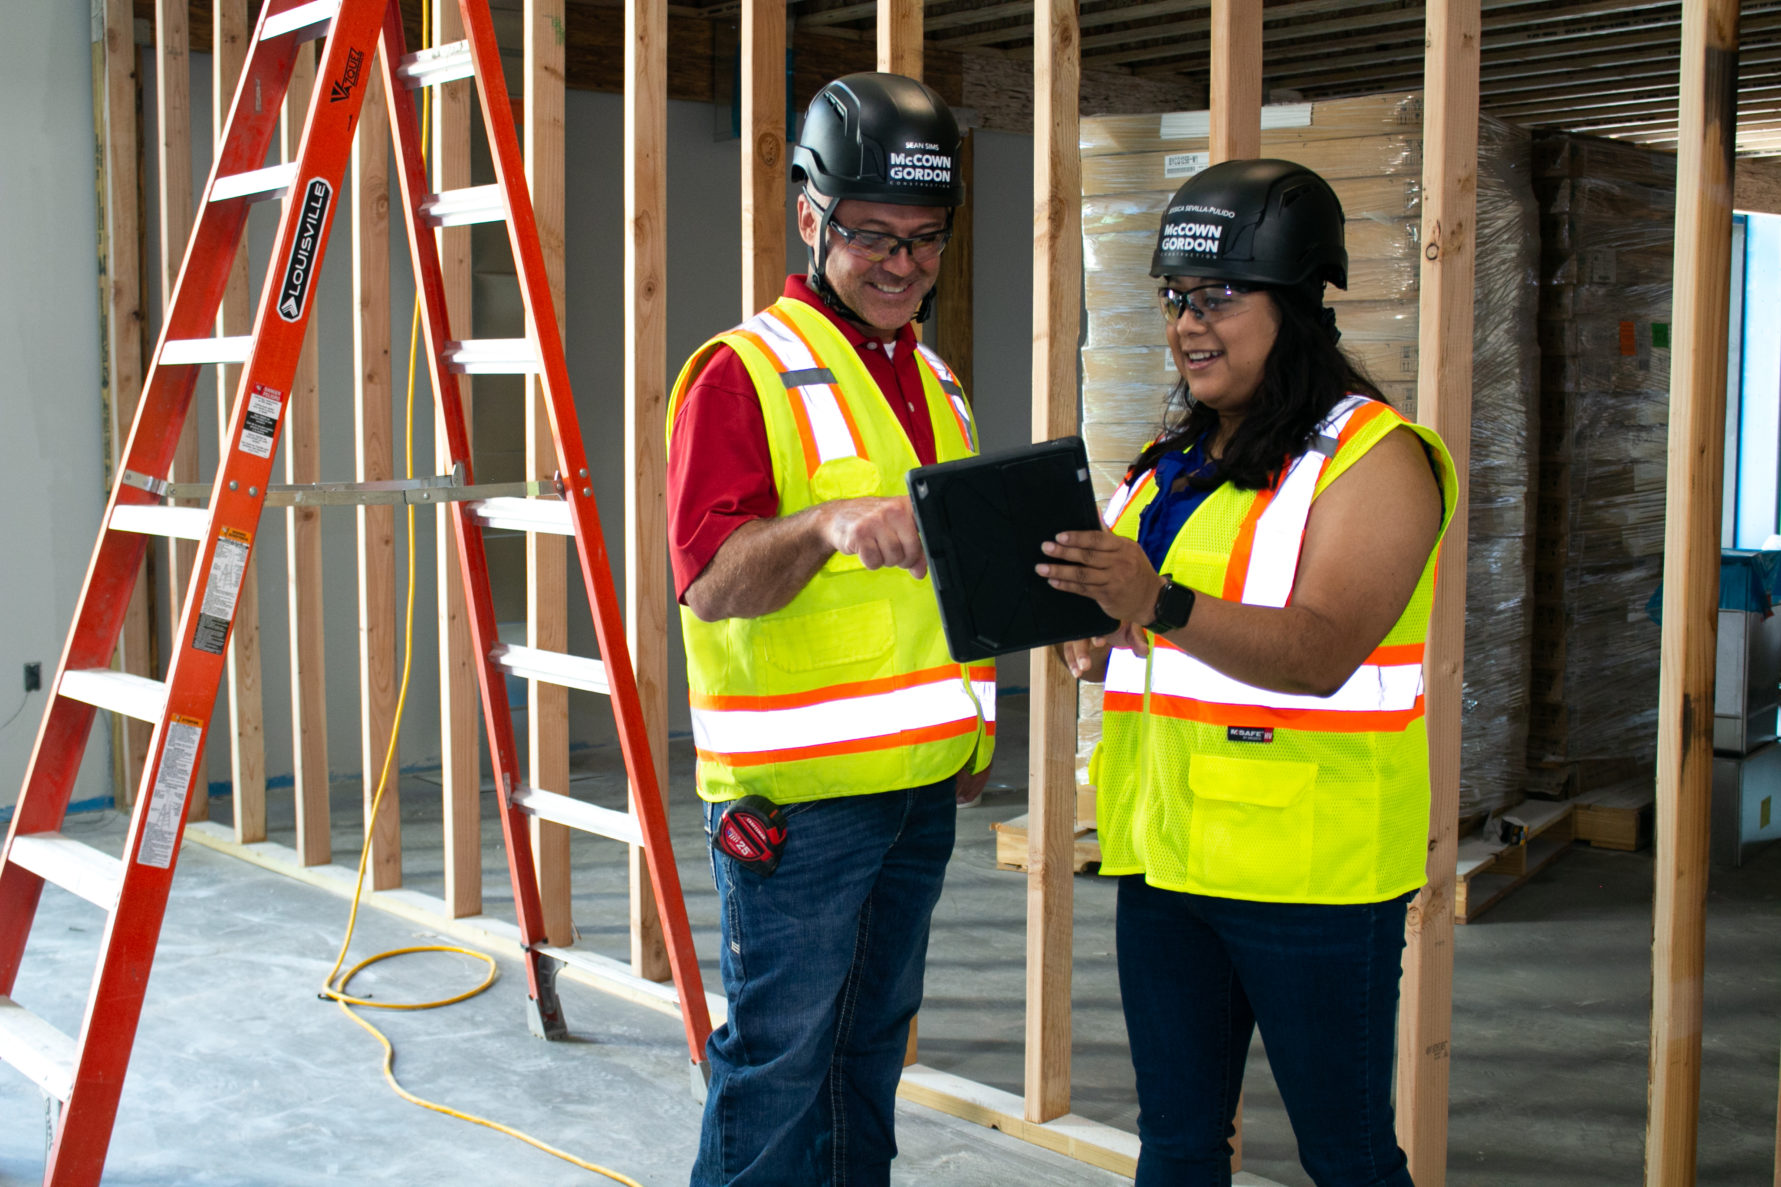 Two McCownGordon Construction associates use technology to check on a project jobsite